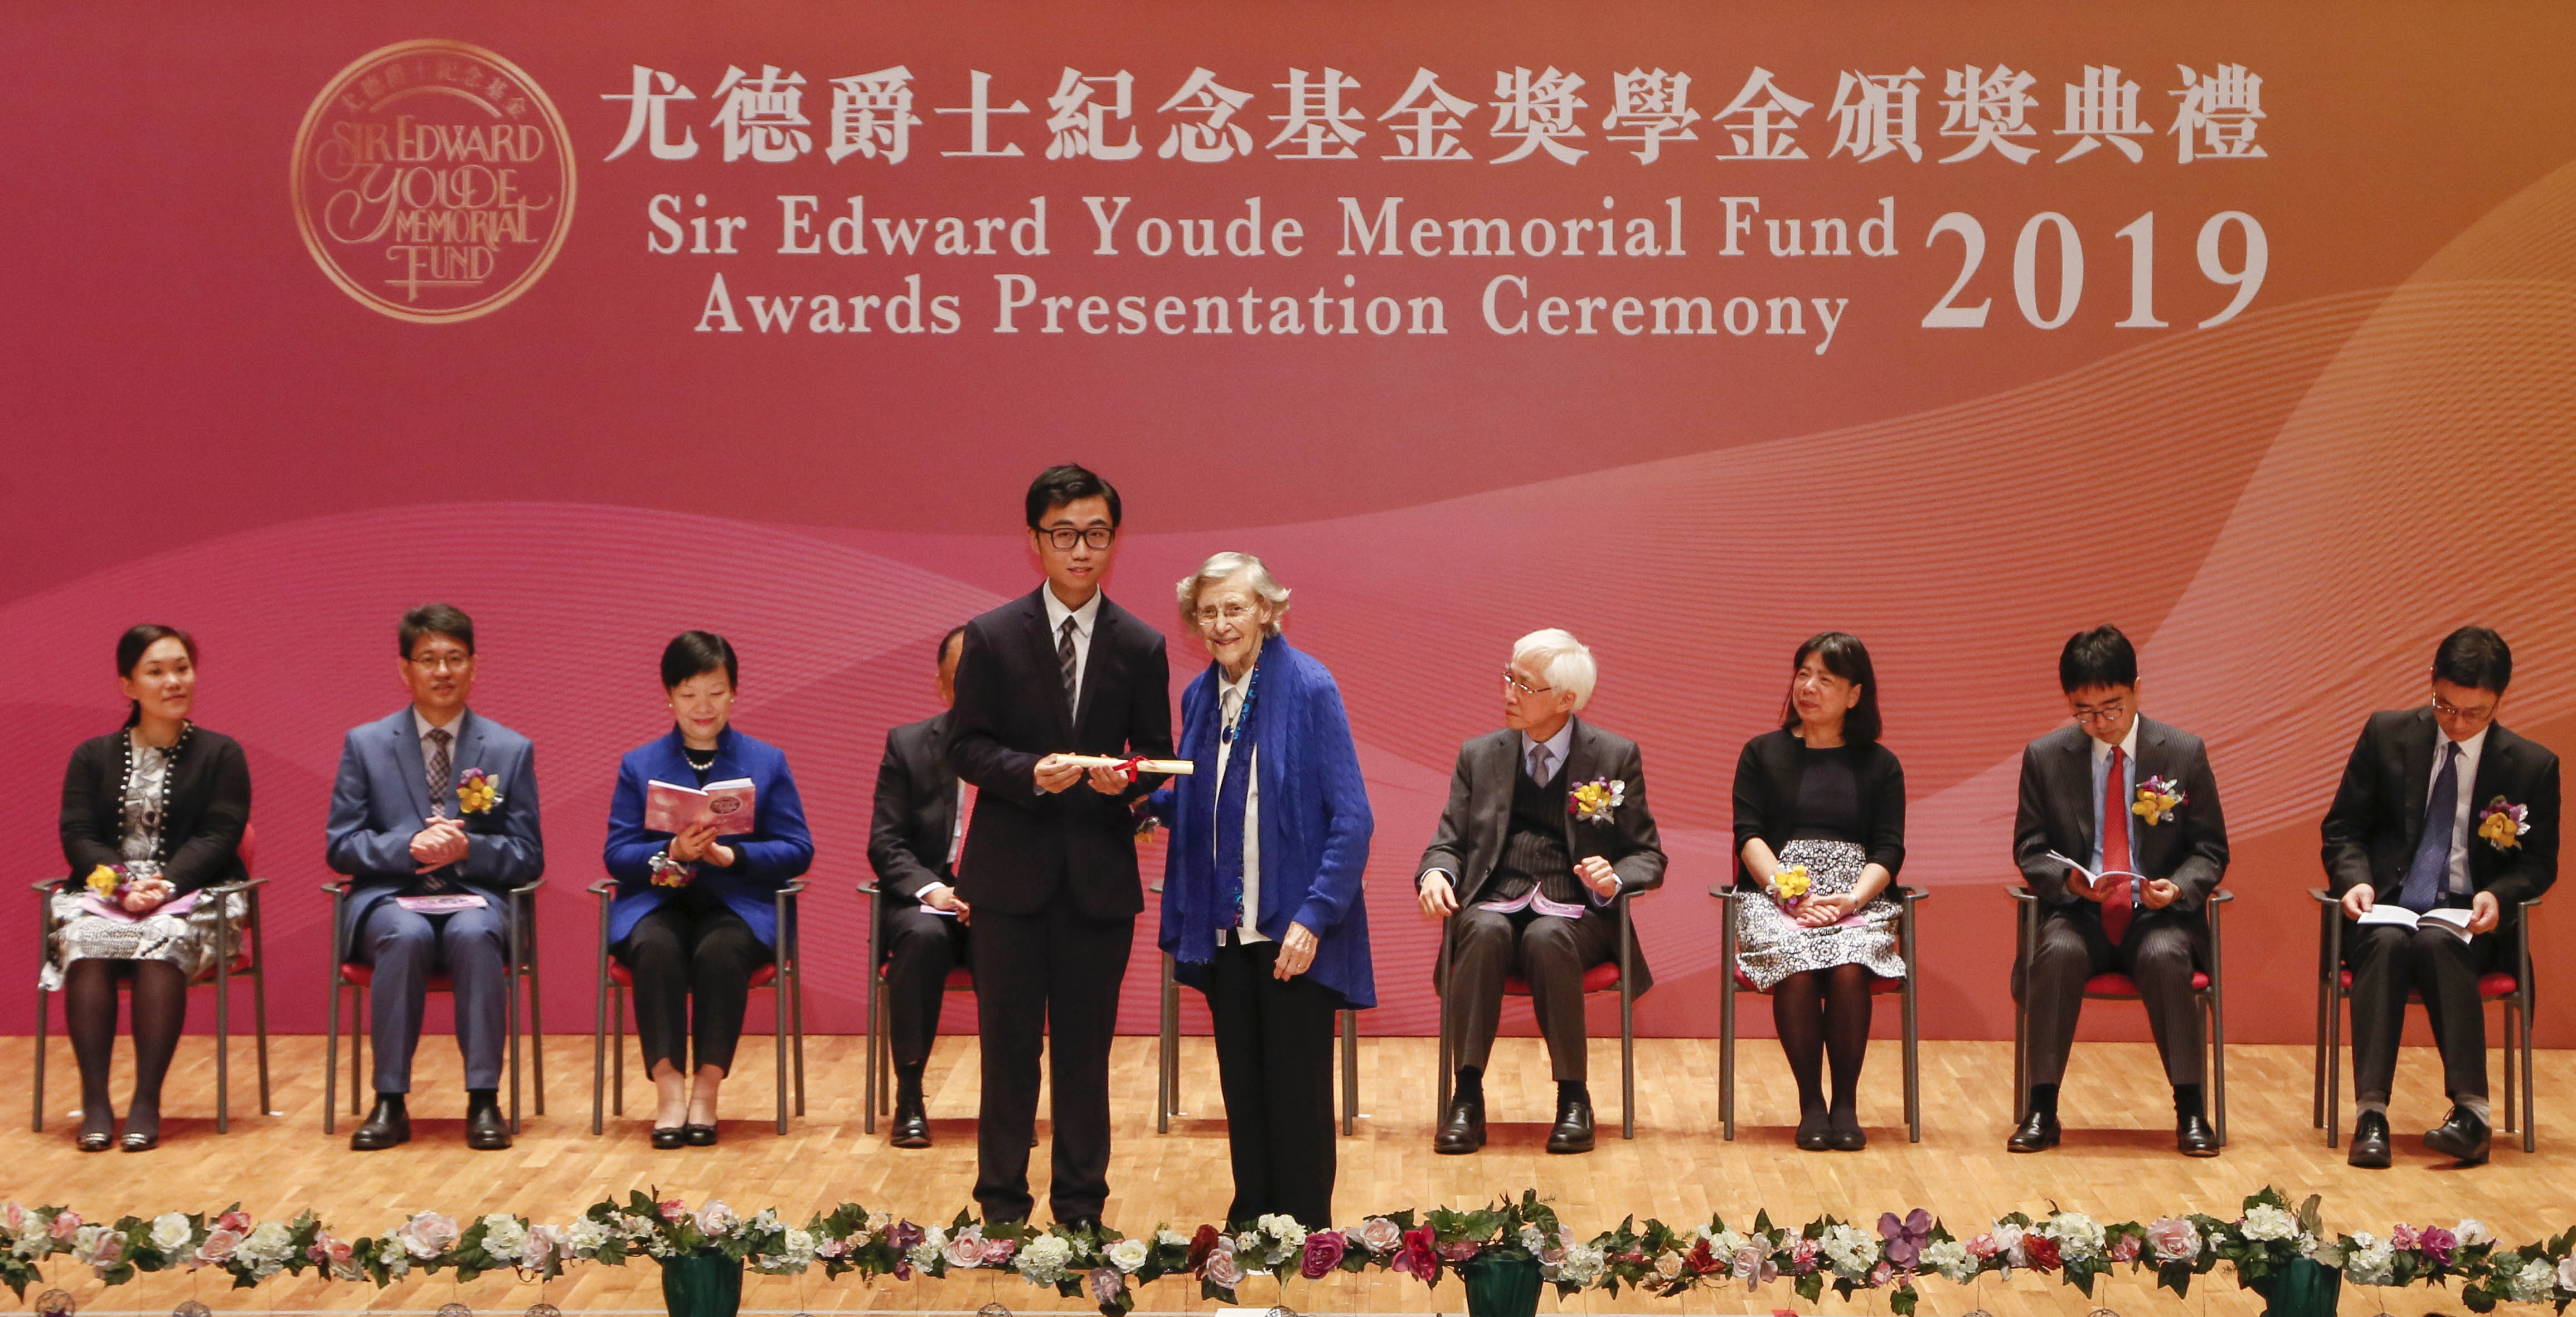 Vincent Yuen receives the scholarship at the award presentation ceremony.